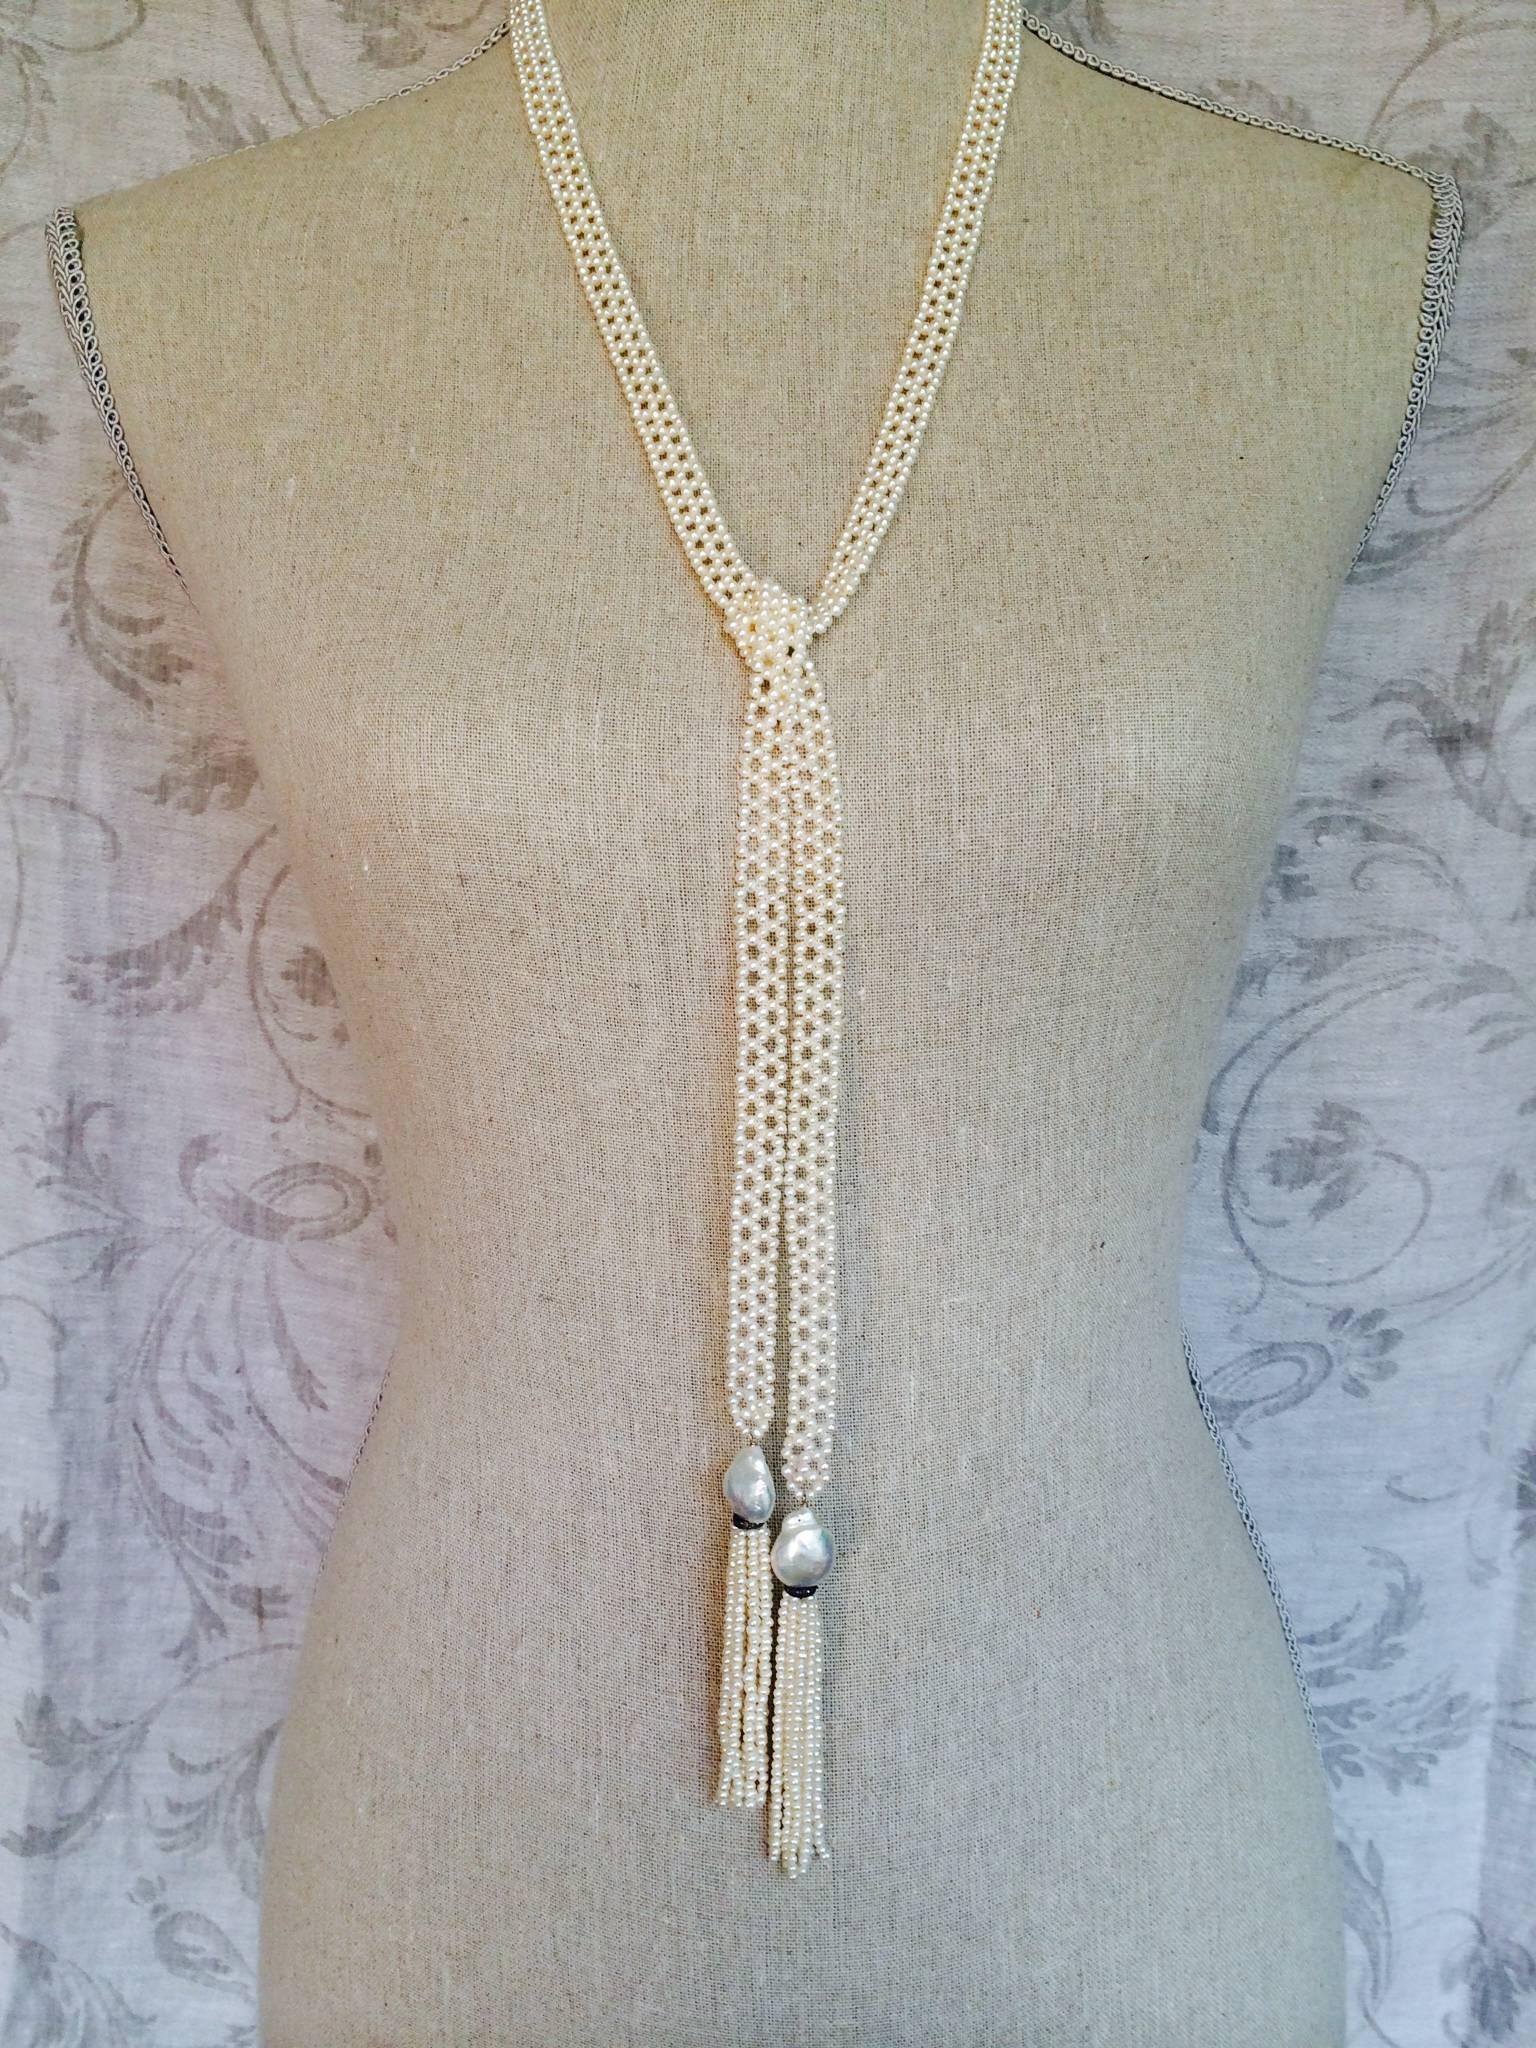 Marina J presents a unique handmade sautoir made of small  white pearls. This sautoir  is hand woven with 2 mm seed pearls into a delicate lace-like design. The ends of the necklace taper to large white pearls and diamond and silver rondels , from